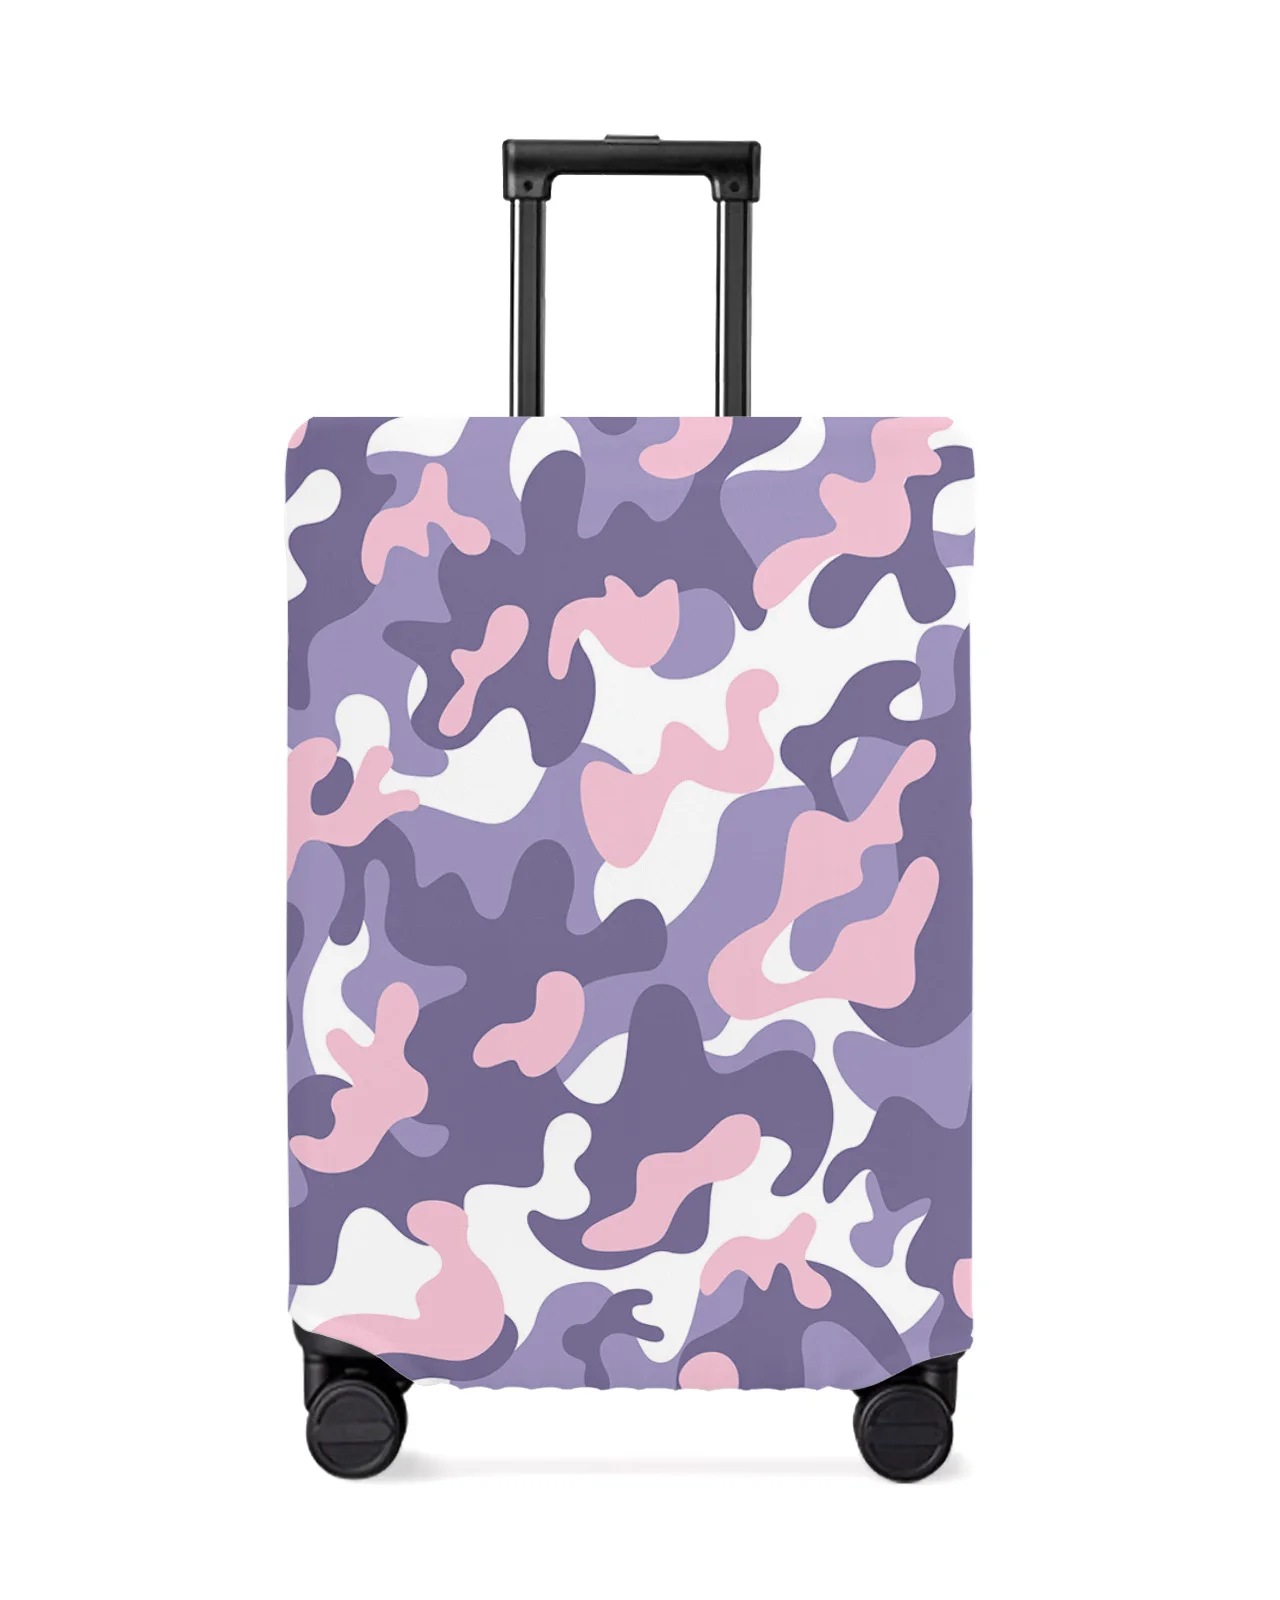 purple-camouflage-abstract-travel-luggage-cover-elastic-baggage-cover-for-18-32-inch-suitcase-case-dust-cover-travel-accessories